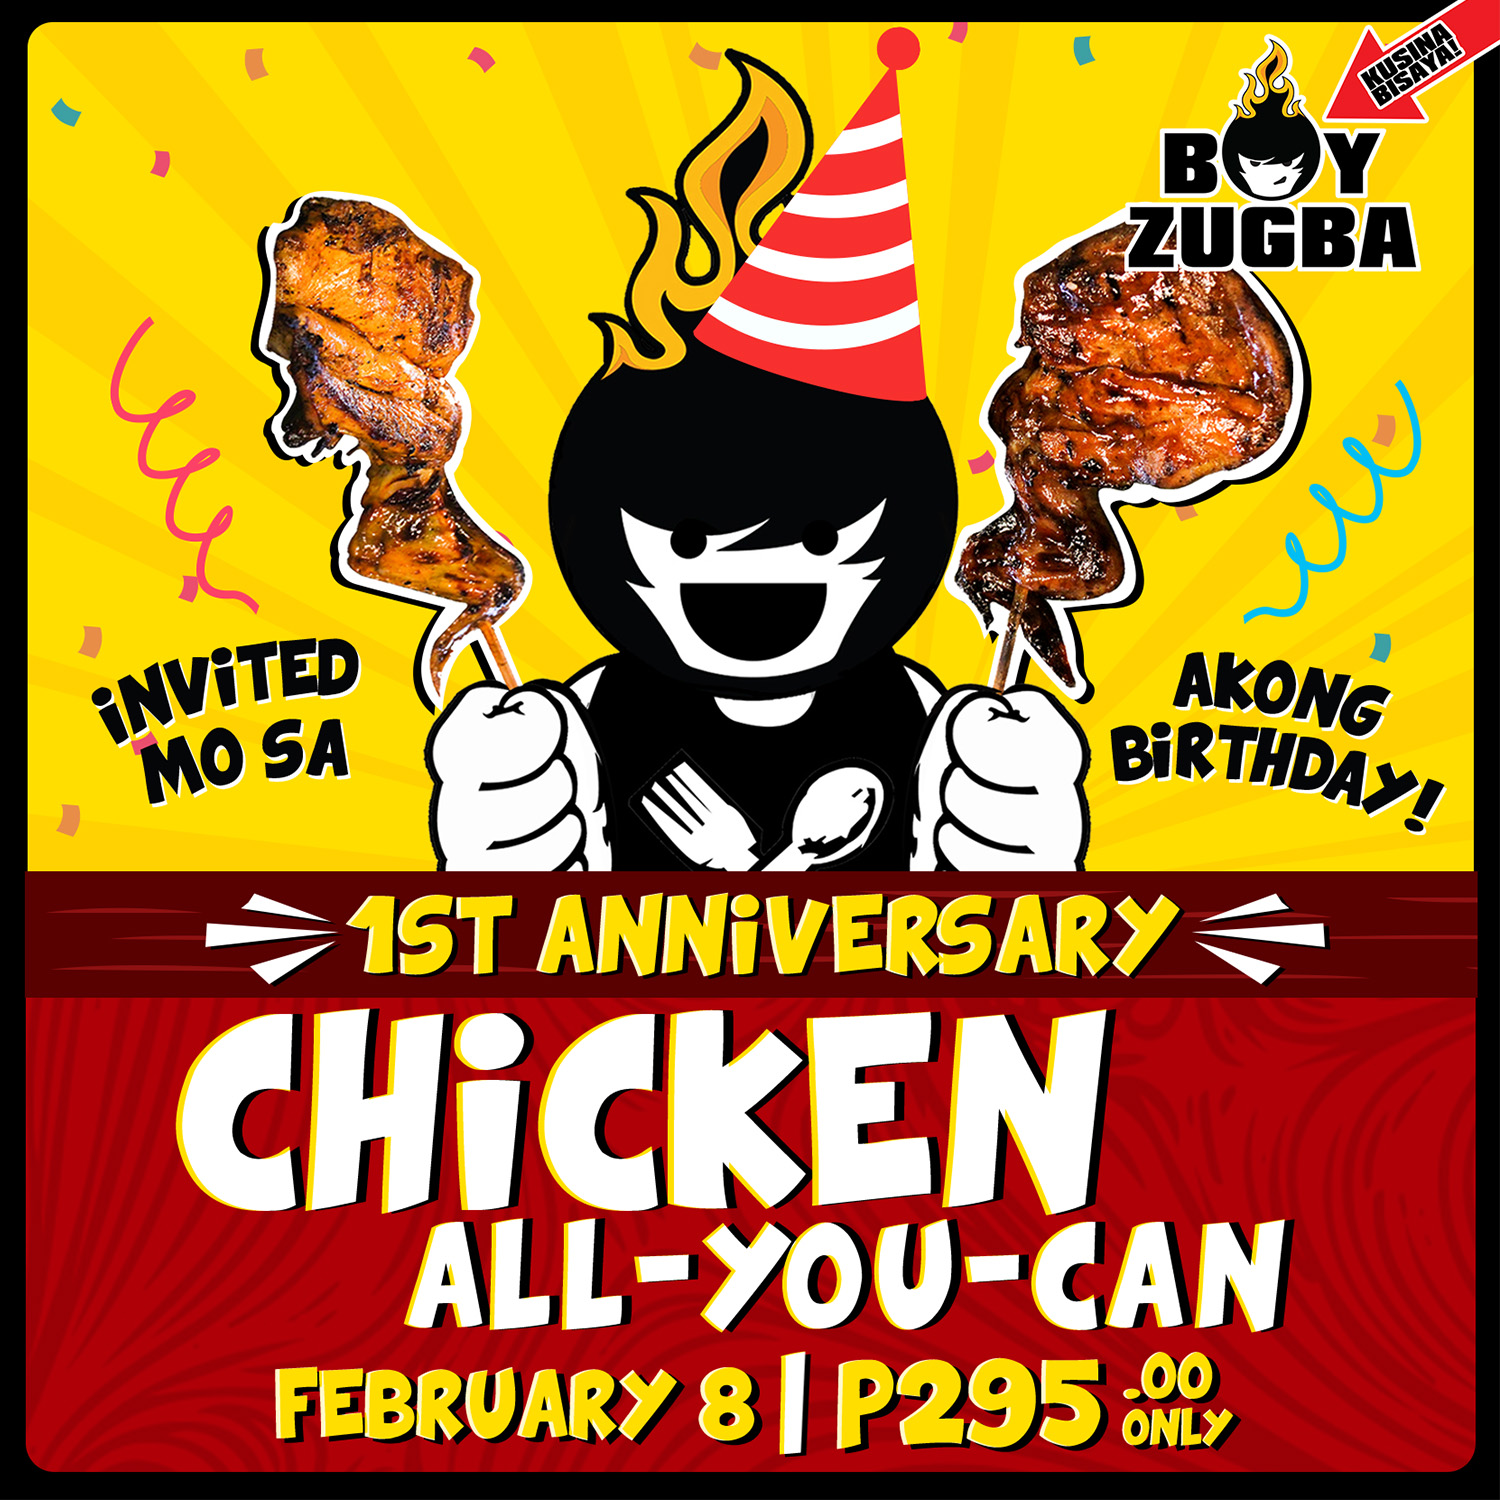 Boy Zugba to Celebrate 1st Birthday with Chicken-All-You-Can!